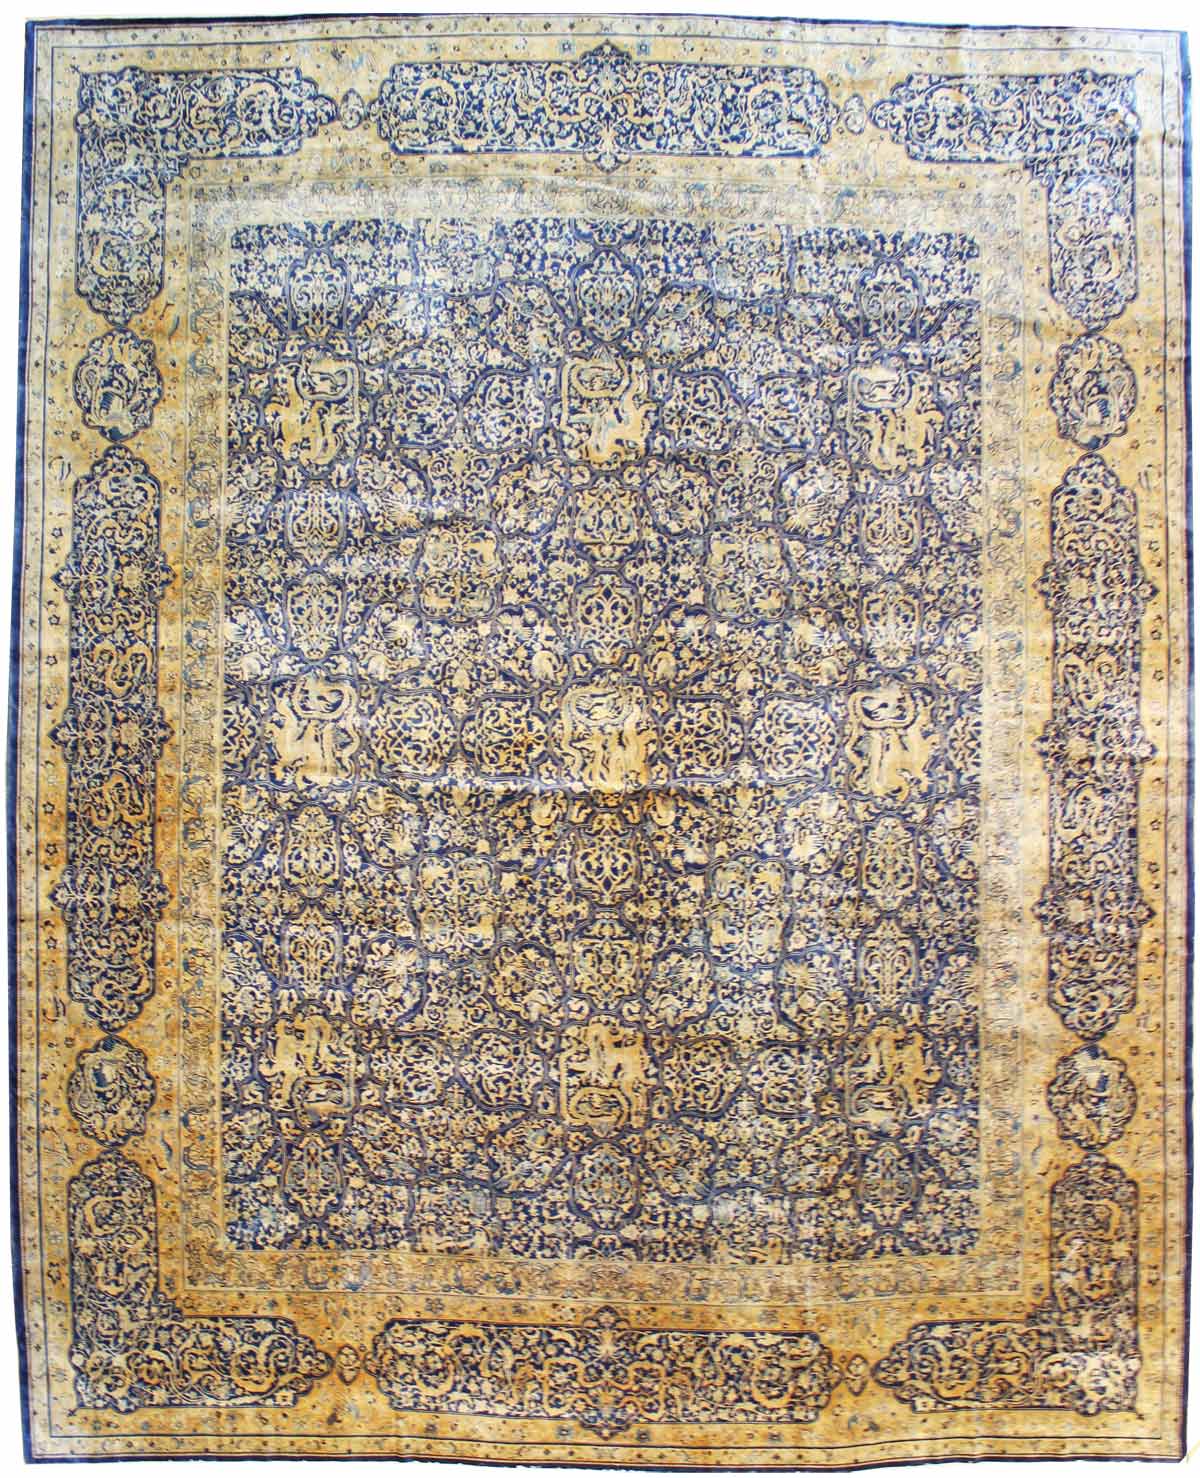 Antique Amritsar Handwoven Traditional Rug